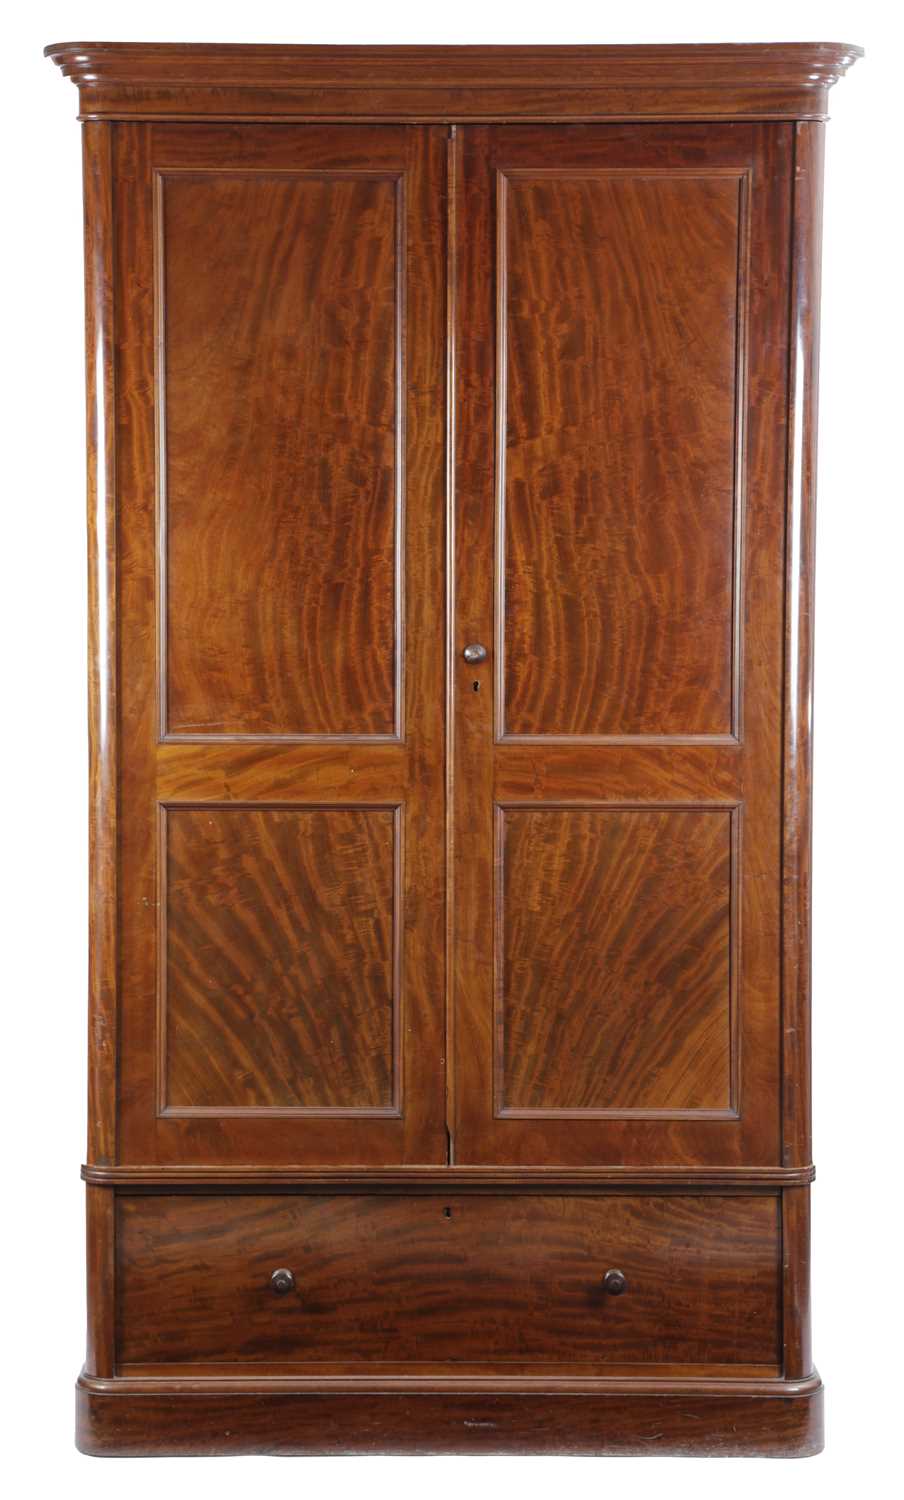 A MATCHED PAIR OF VICTORIAN MAHOGANY WARDROBES BY HOLLAND & SONS, C.1870-80 each with a moulded